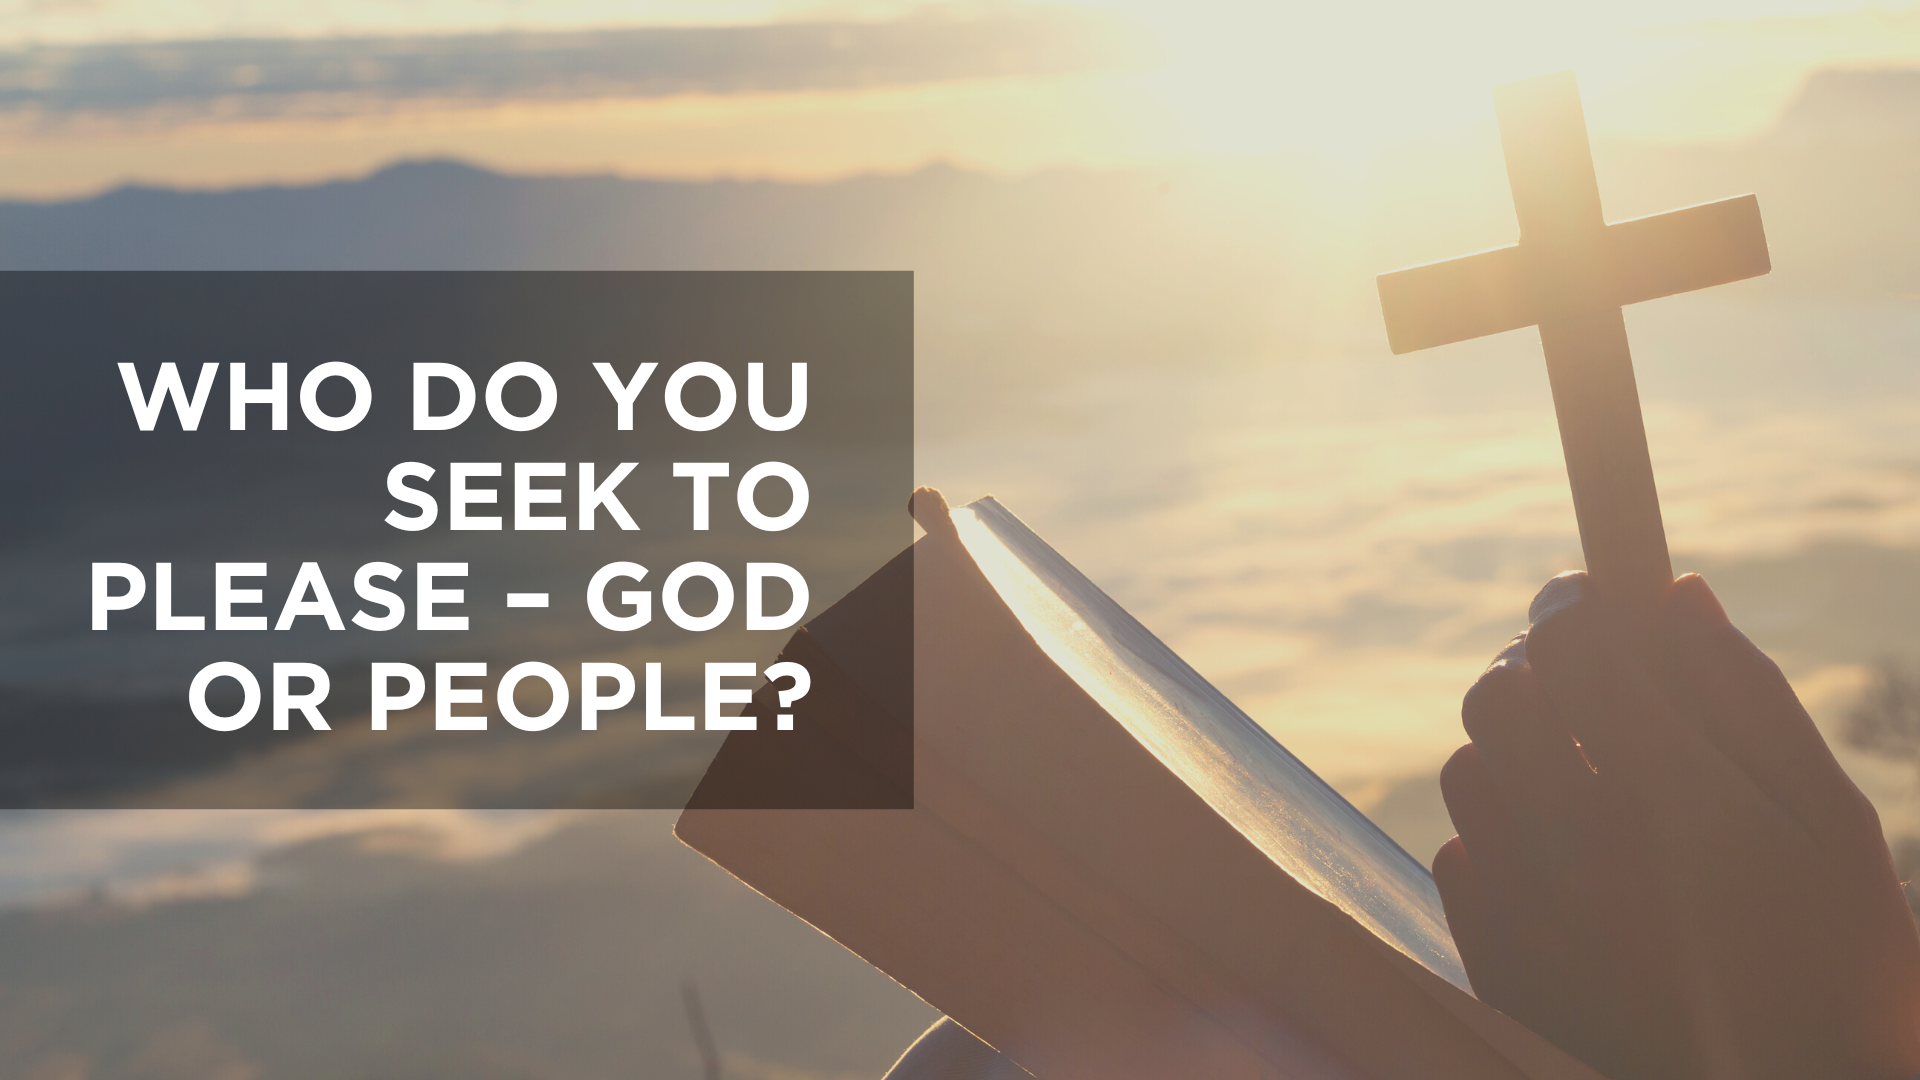 Who Do You Seek to Please - God or People